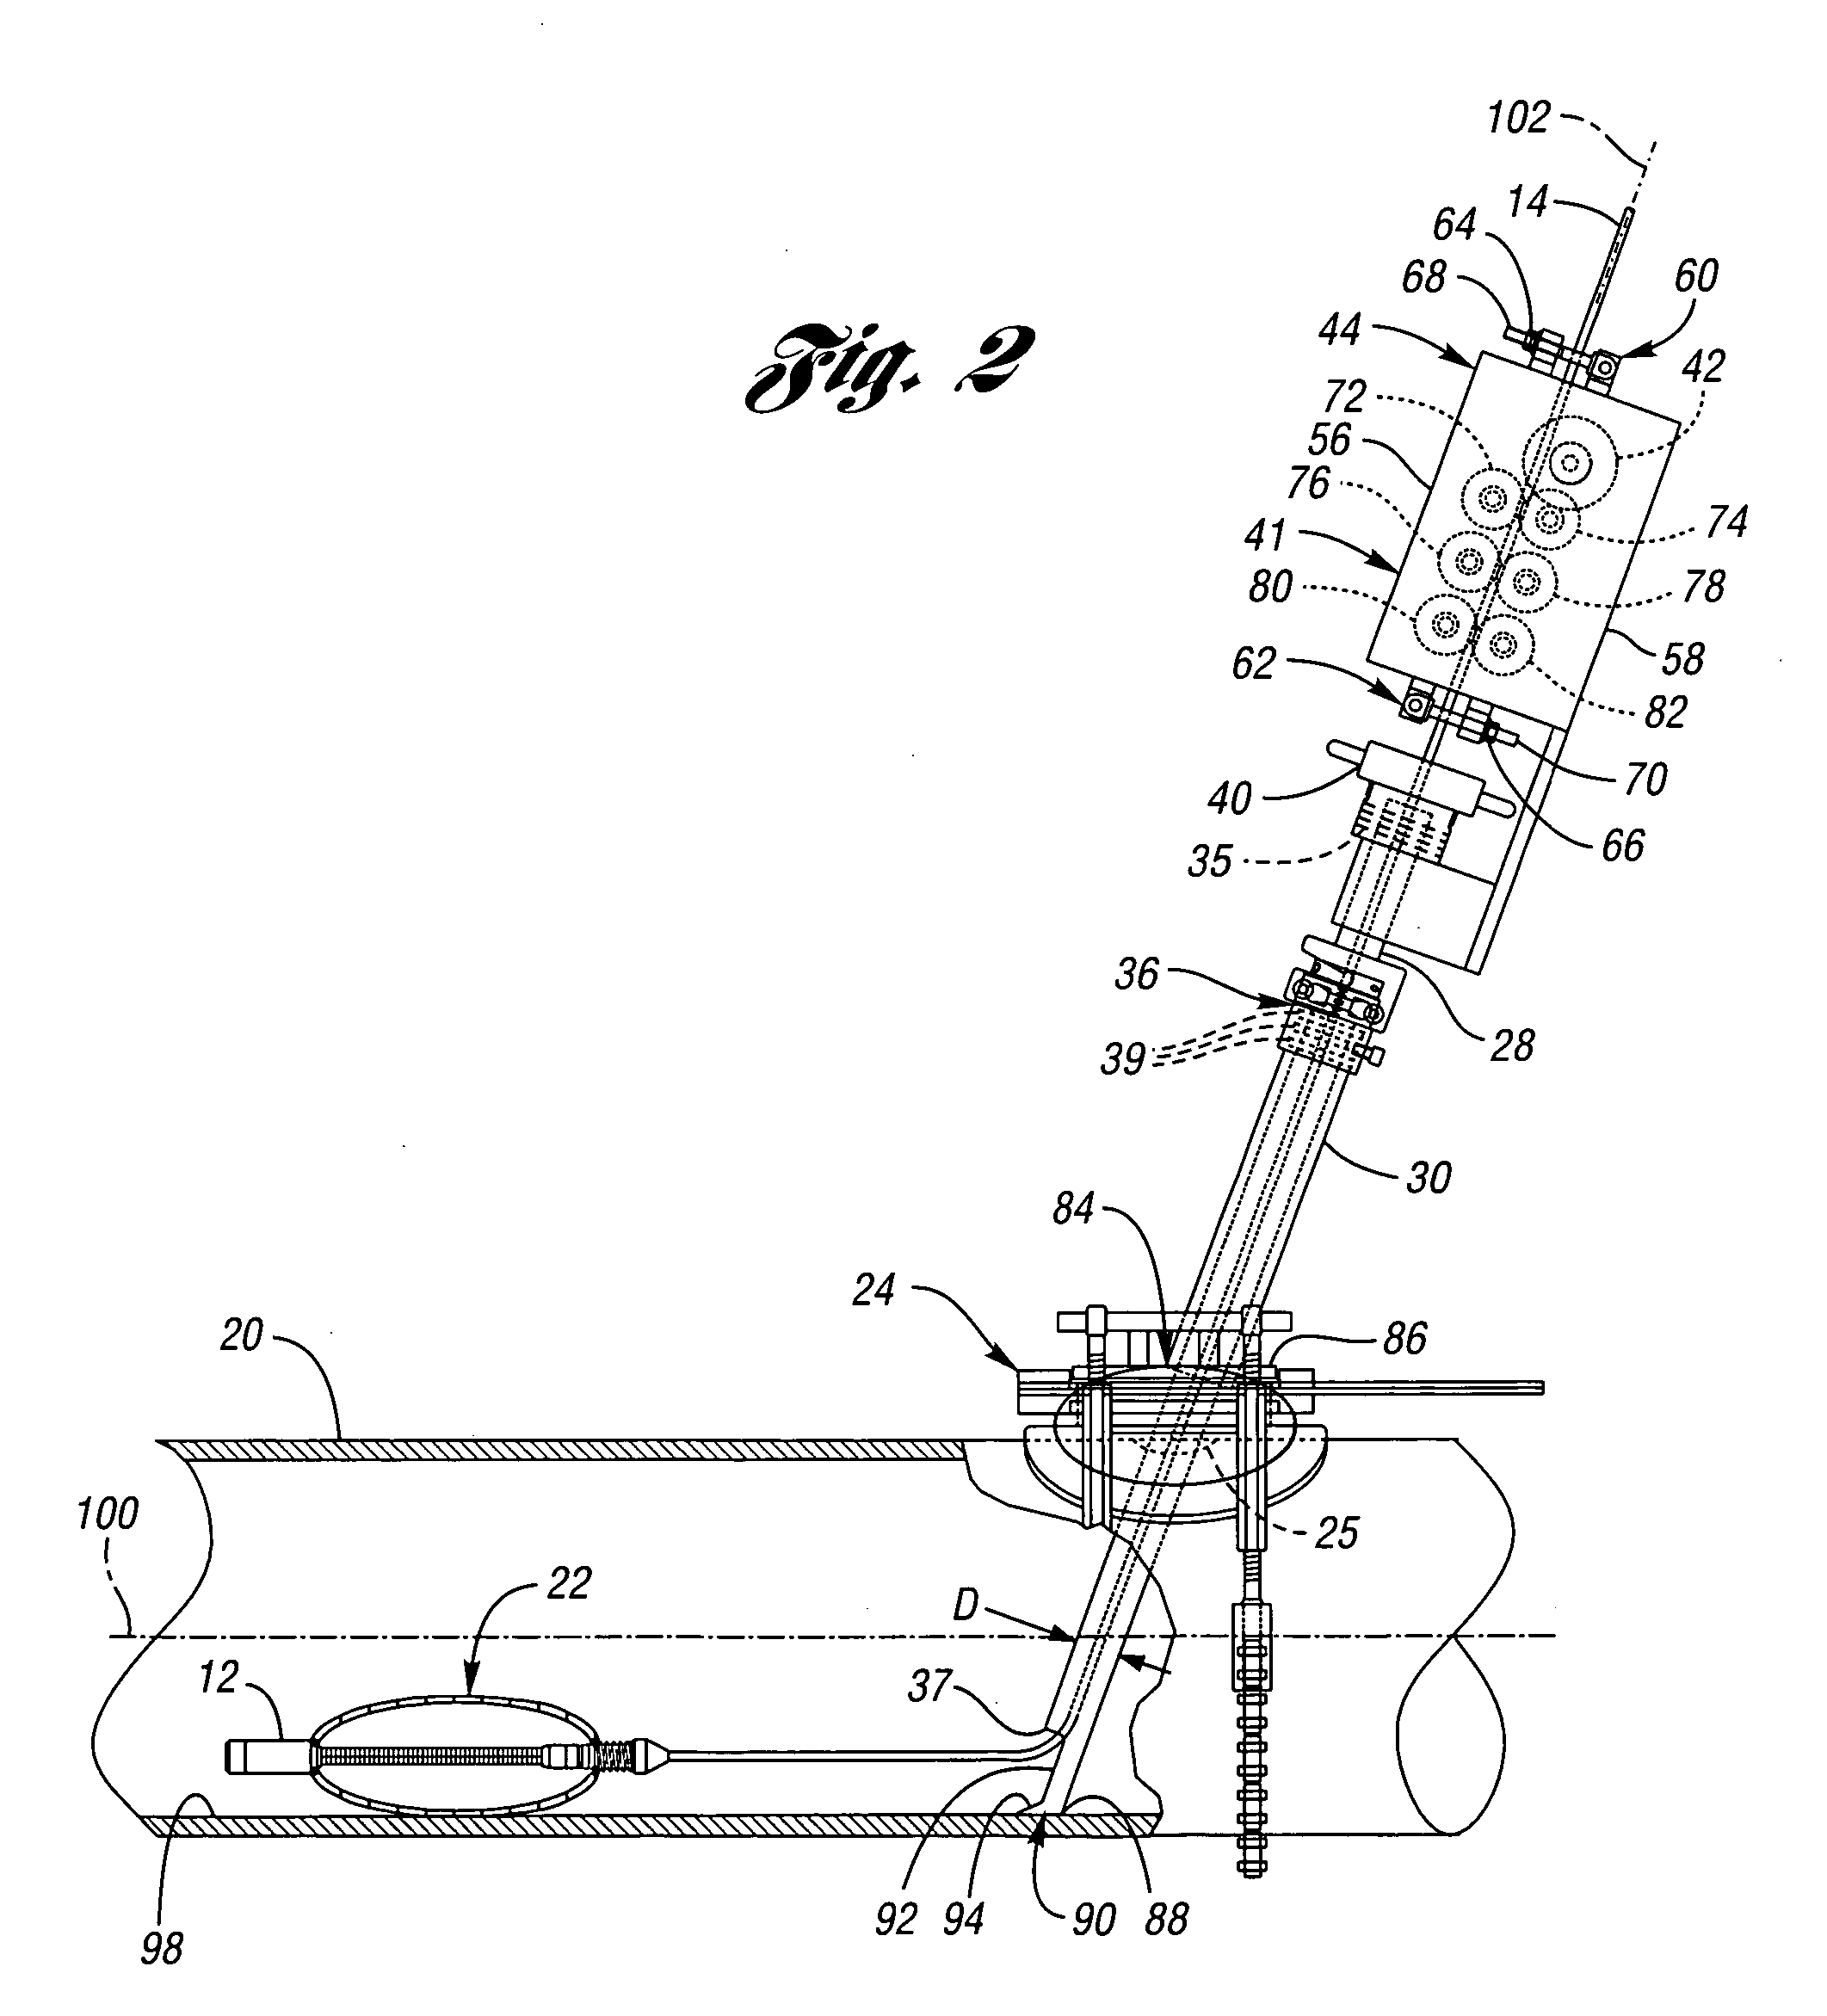 Pipeline inspection system